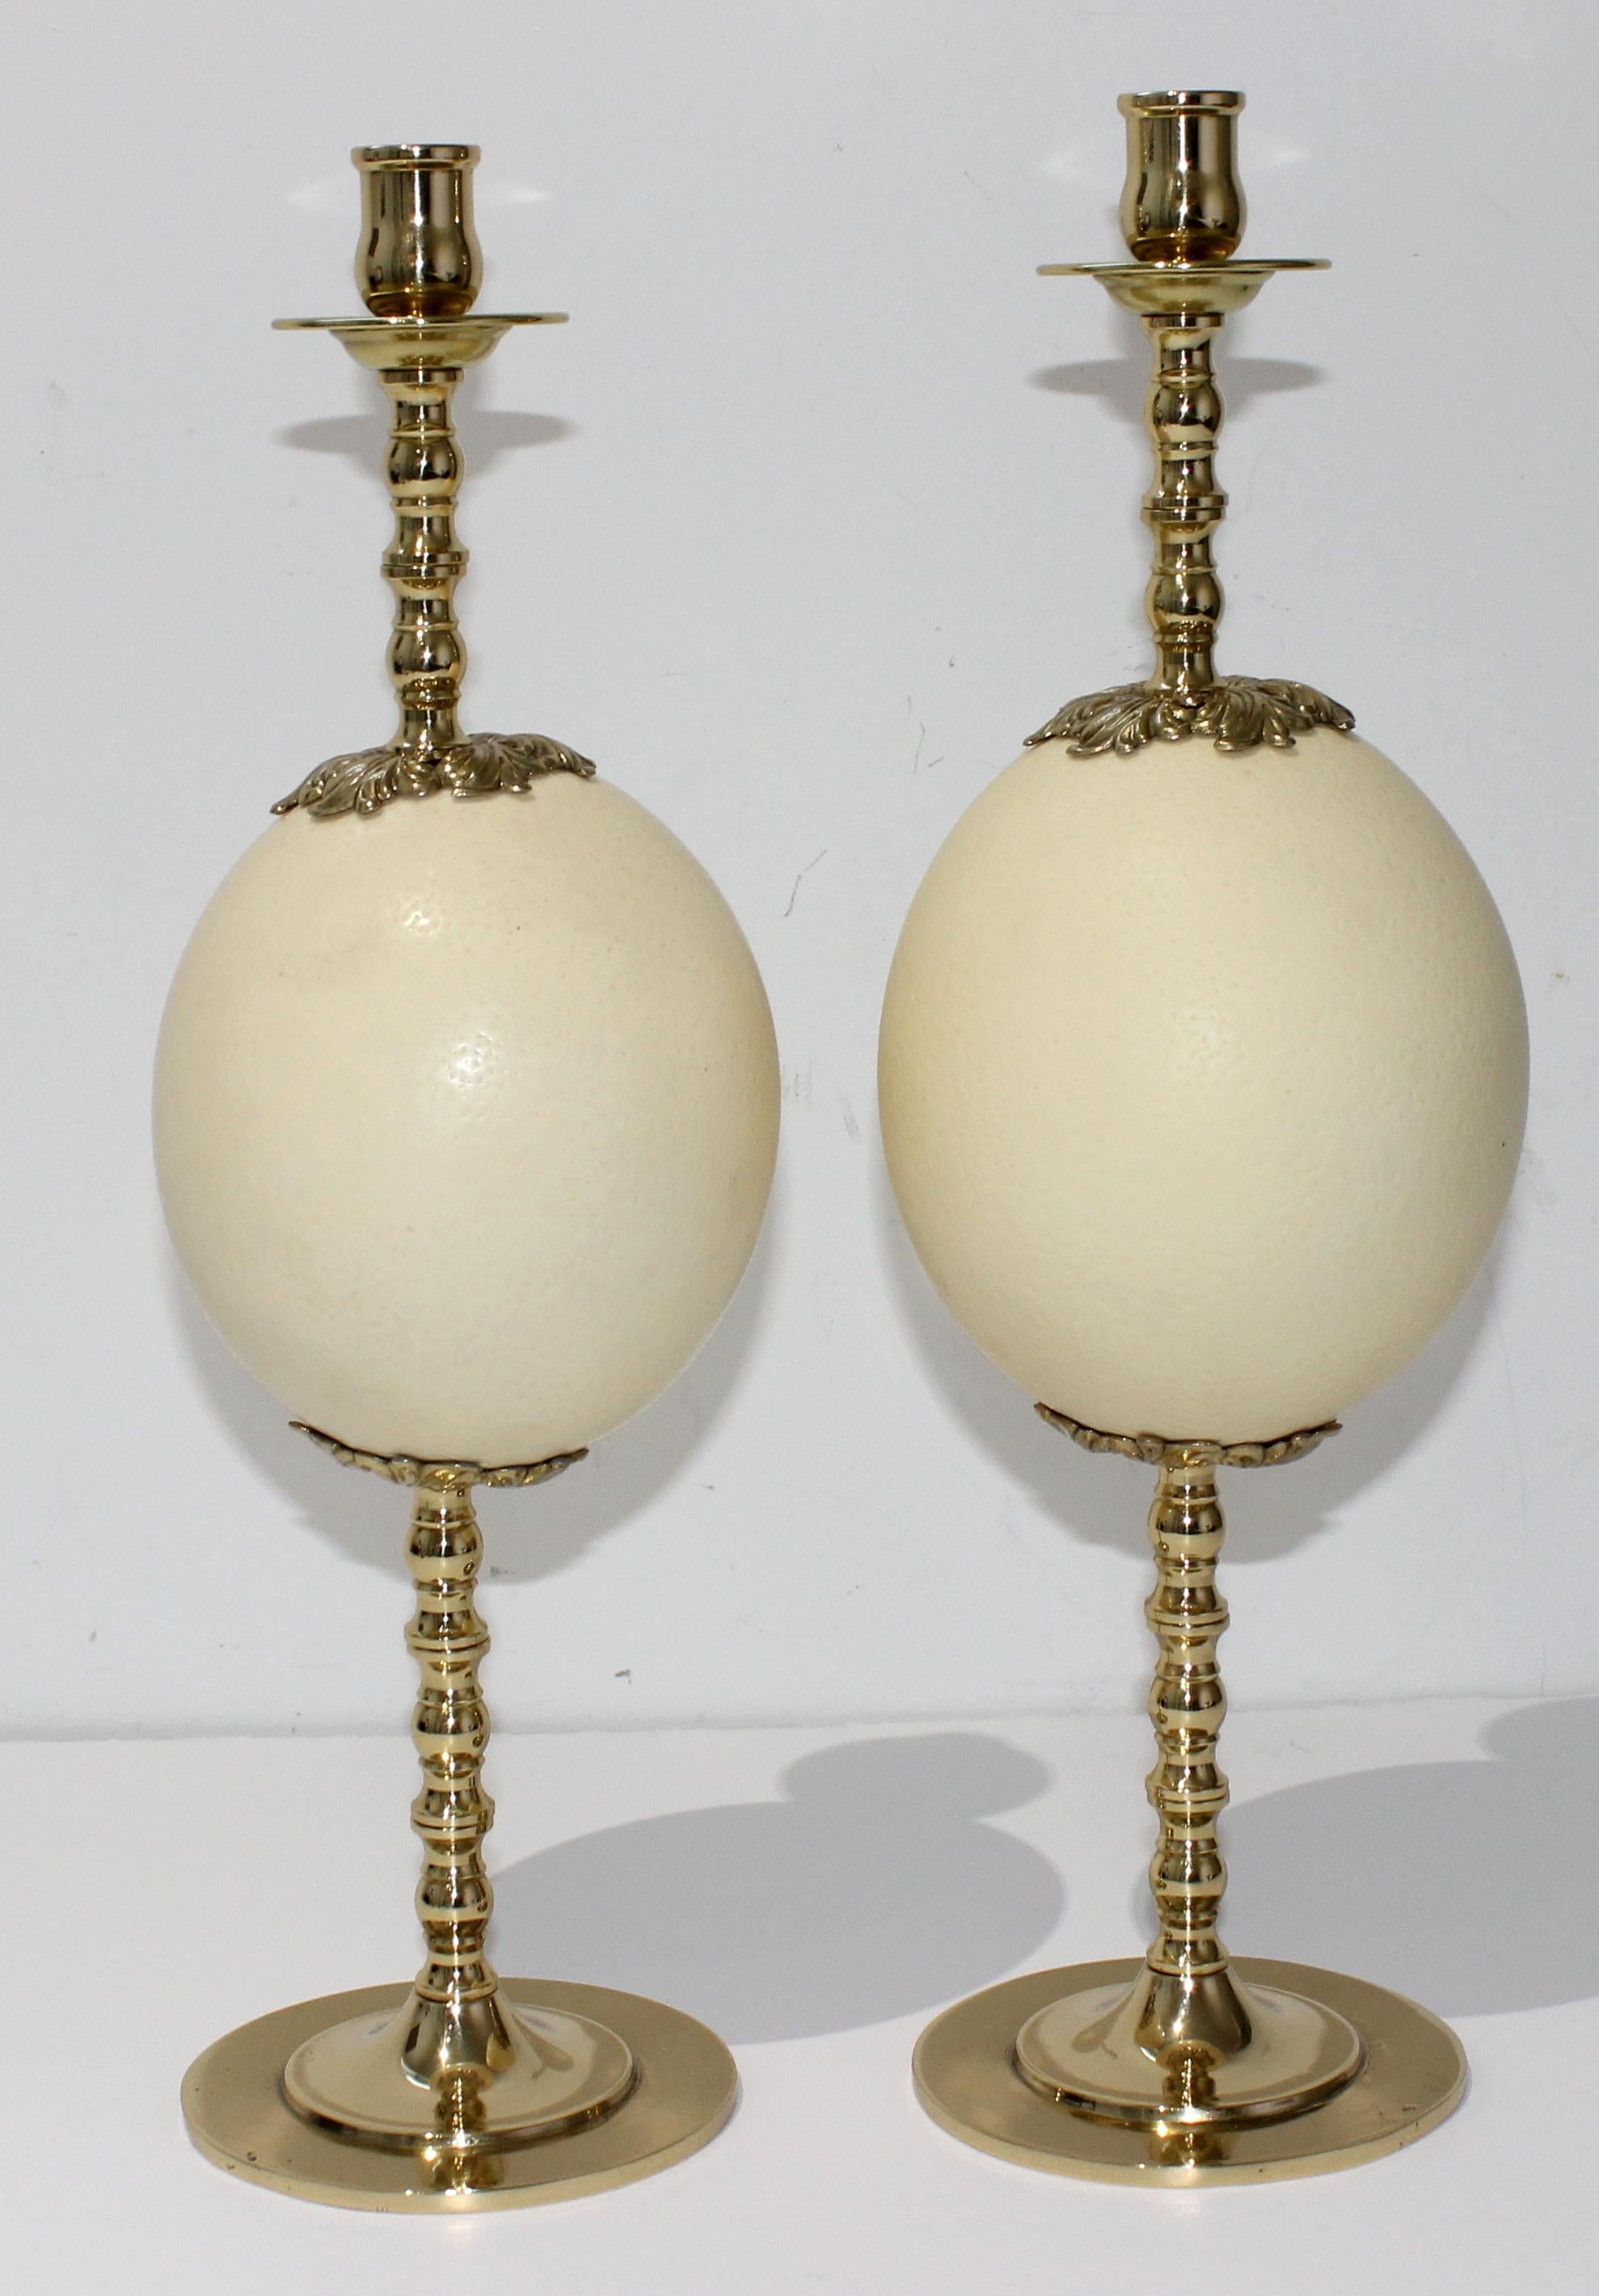 This stylish set of Hollywood Regency ostrich egg candle sticks date the the 1960s and are very much in the style of pieces coveted by Tony Duquette.

Note: The brass has been professionally polished and finished with a clear-coat lacquer, so no